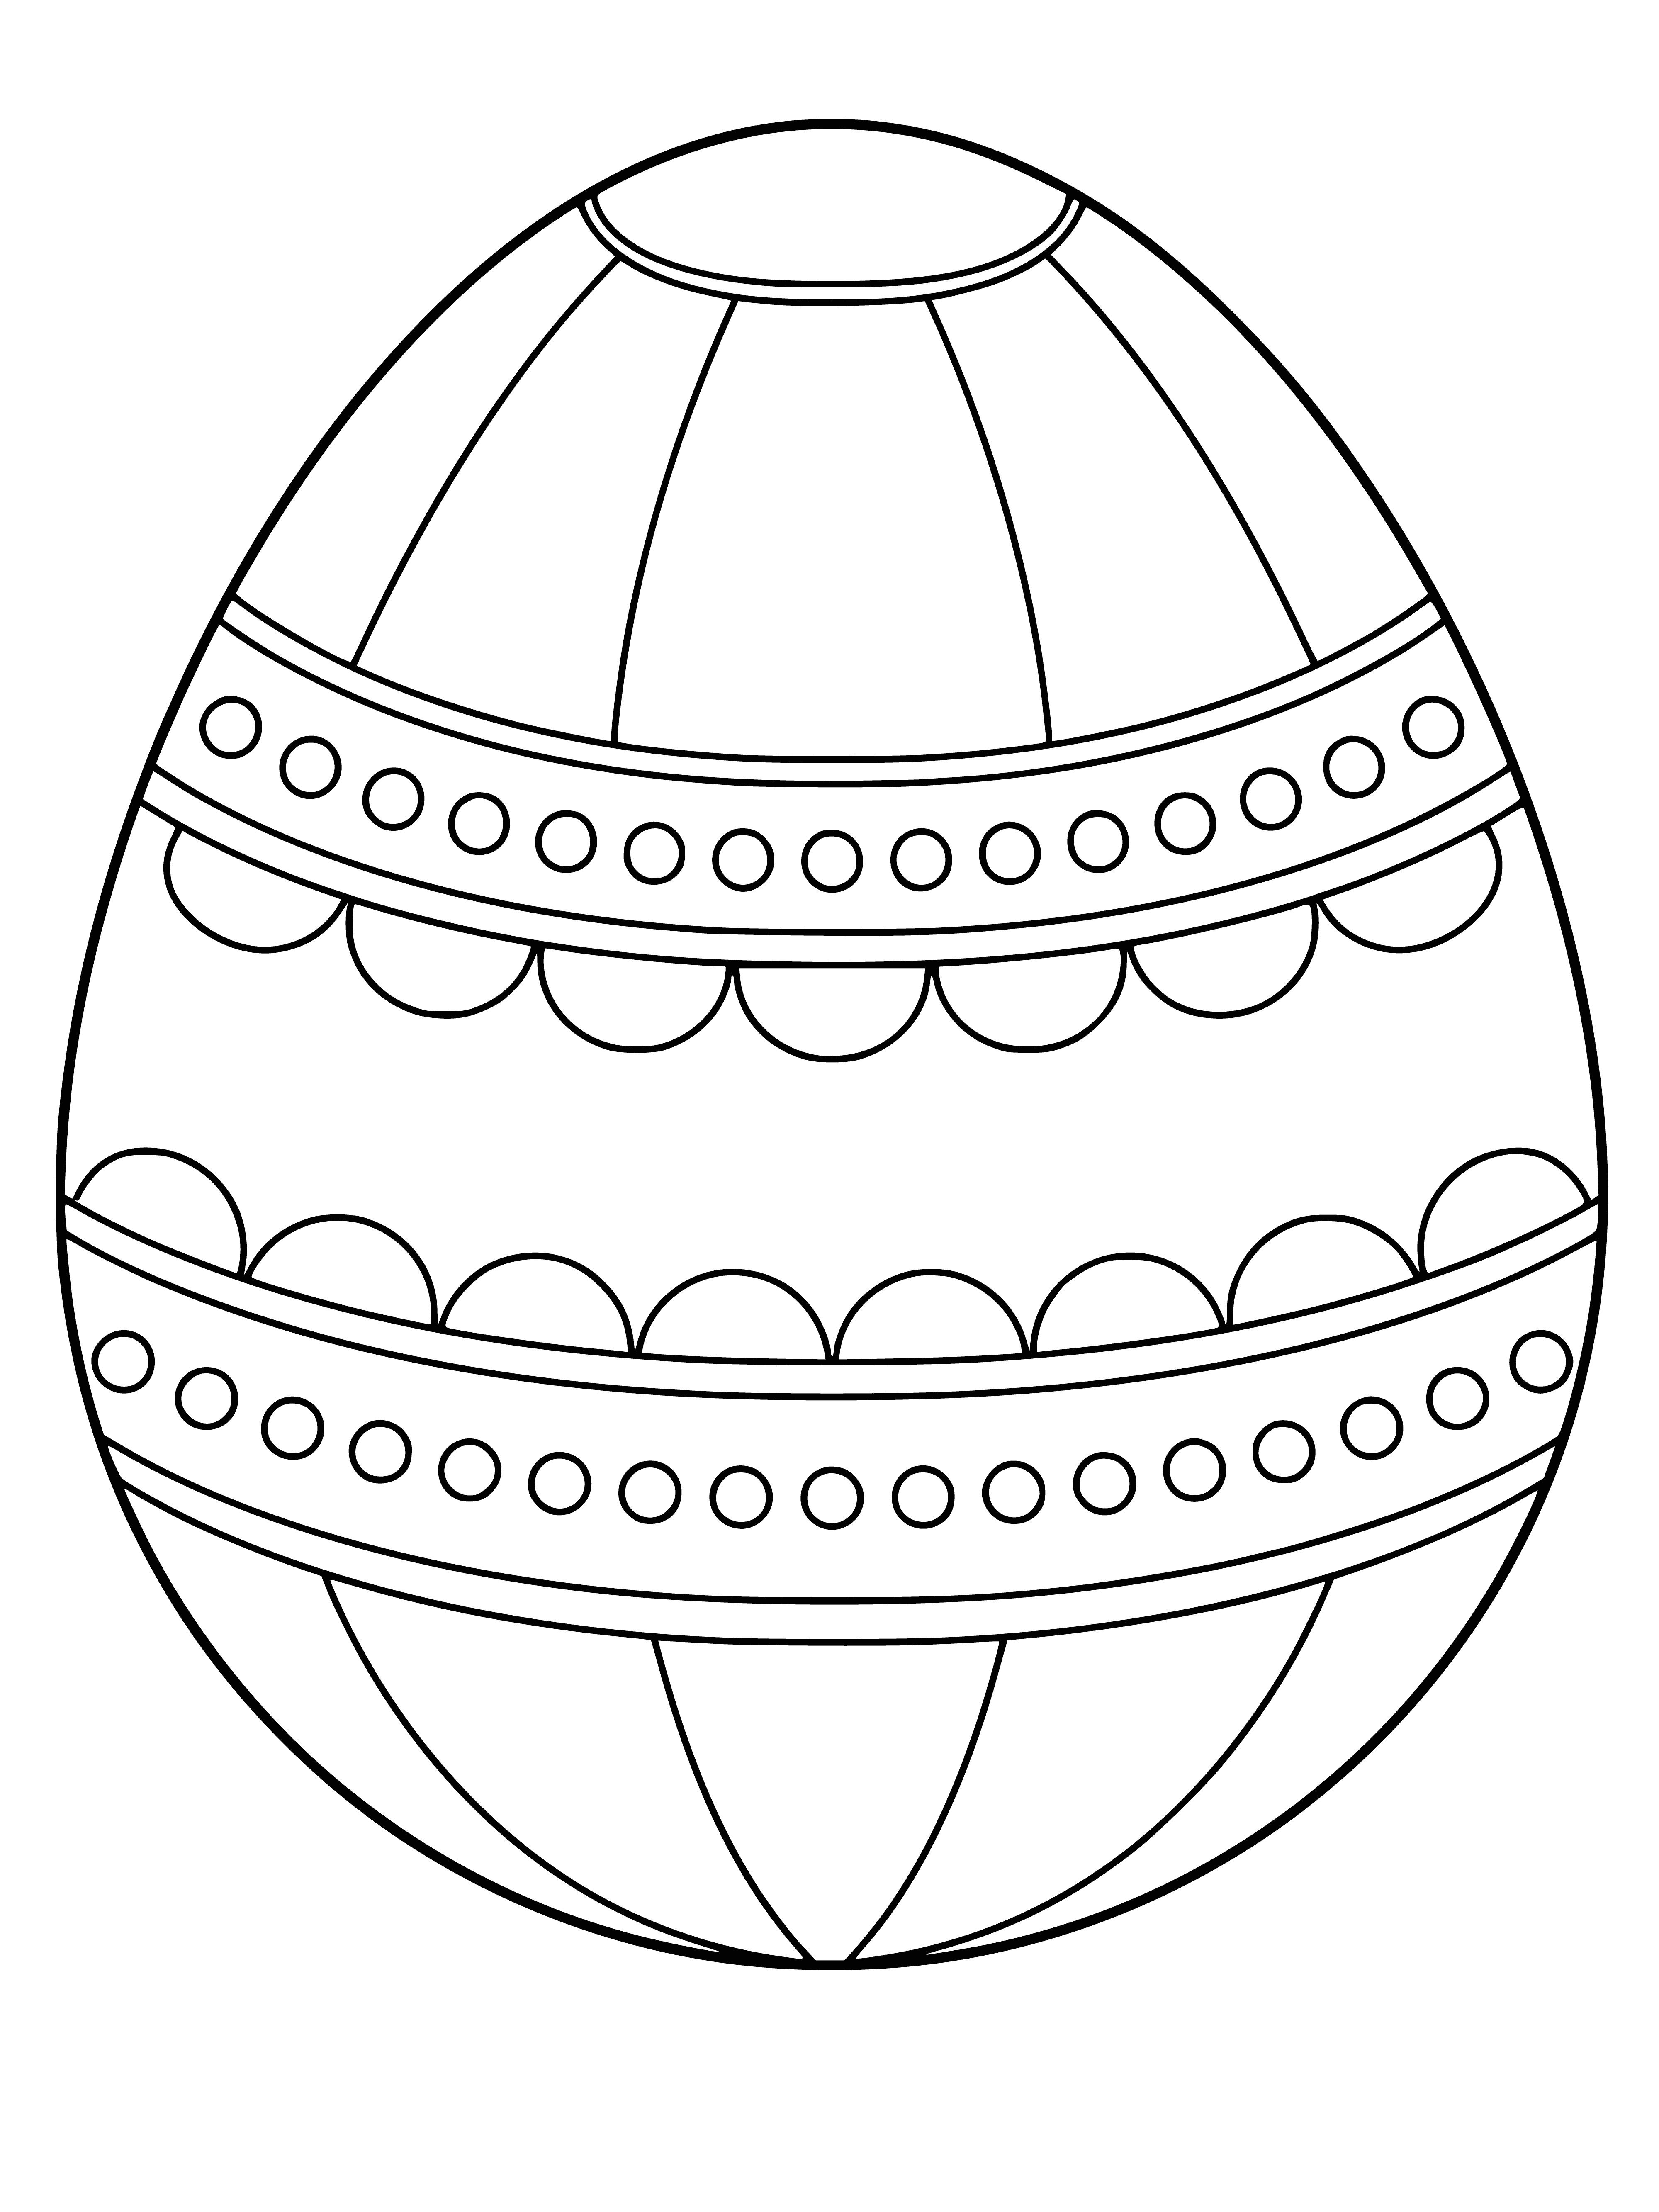 coloring page: Three Easter eggs nestled in green grass, one cracked open with a yellow yolk inside.